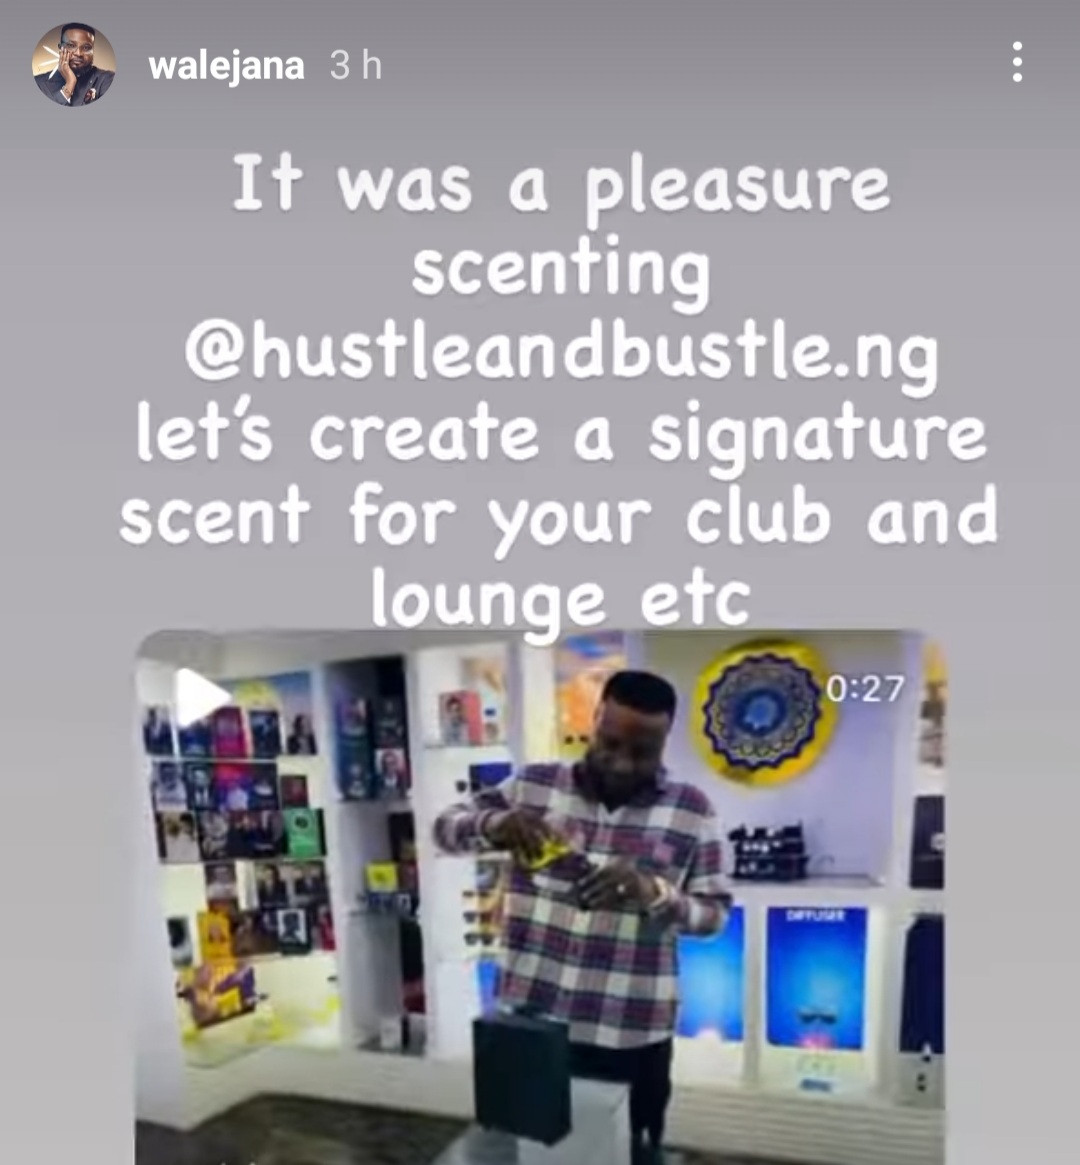 Battle of the fragrance dealers: Ehi Ogbebor throws shade at male competitor who accused her of 